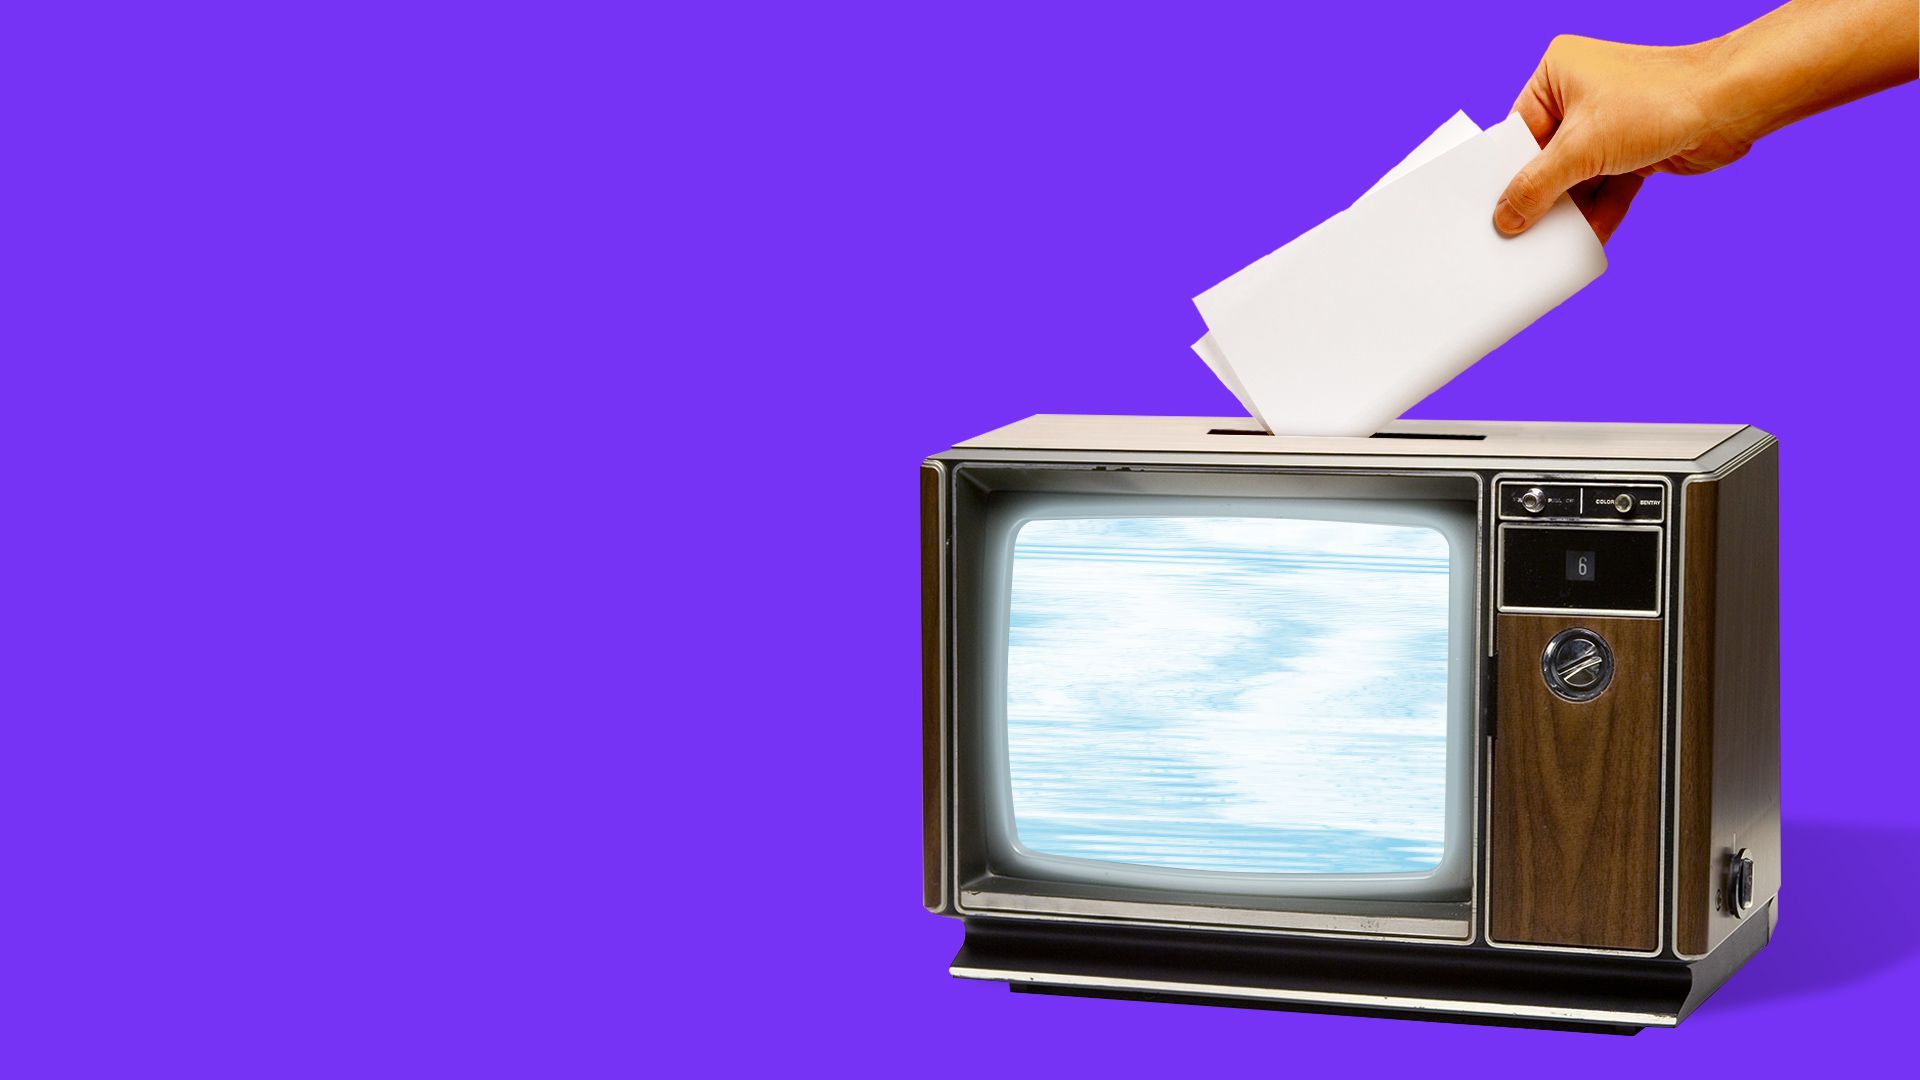 Illustration of a hand placing a ballot in an old fashioned television as if it were a ballot box. 